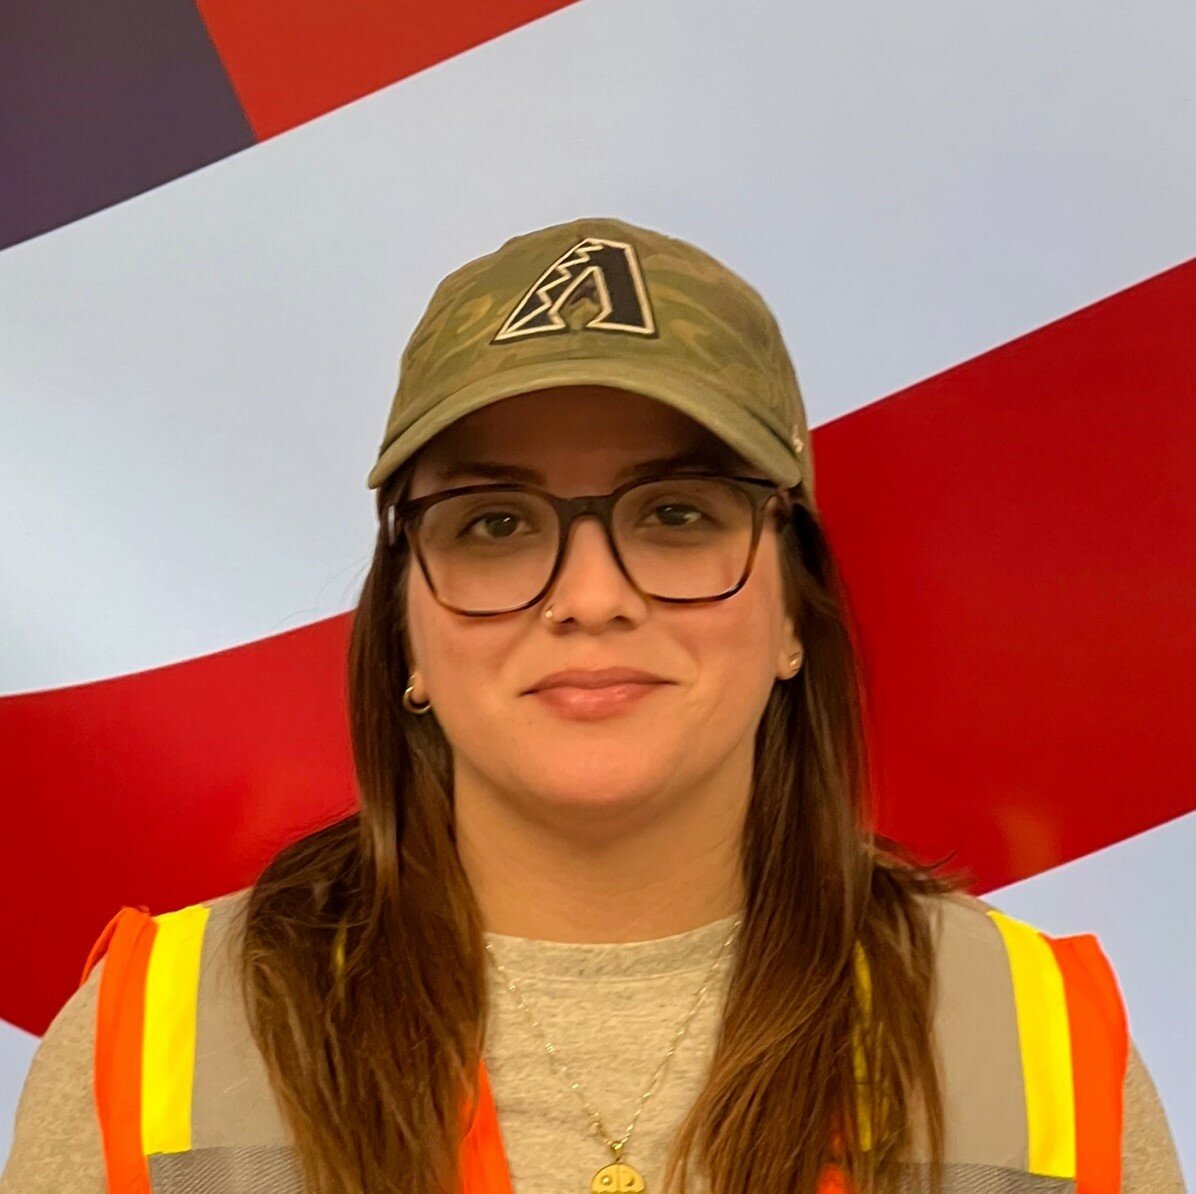 Rebecca Haytasingh is a new public works technician for the Town of Paradise Valley.